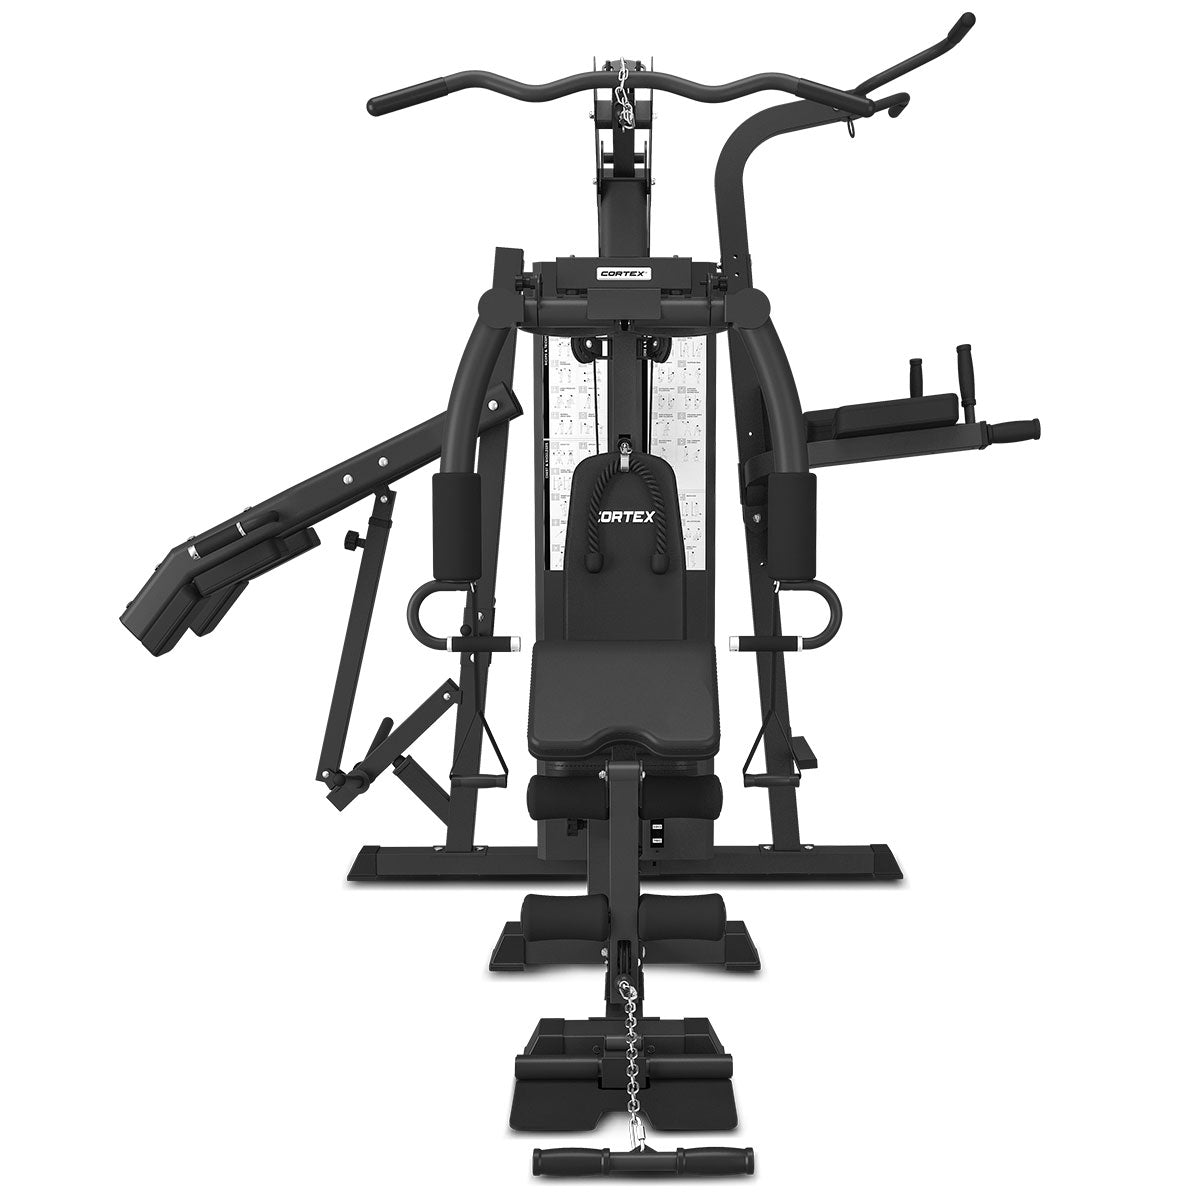 Cortex GS7 Home Gym with 73kg Stack